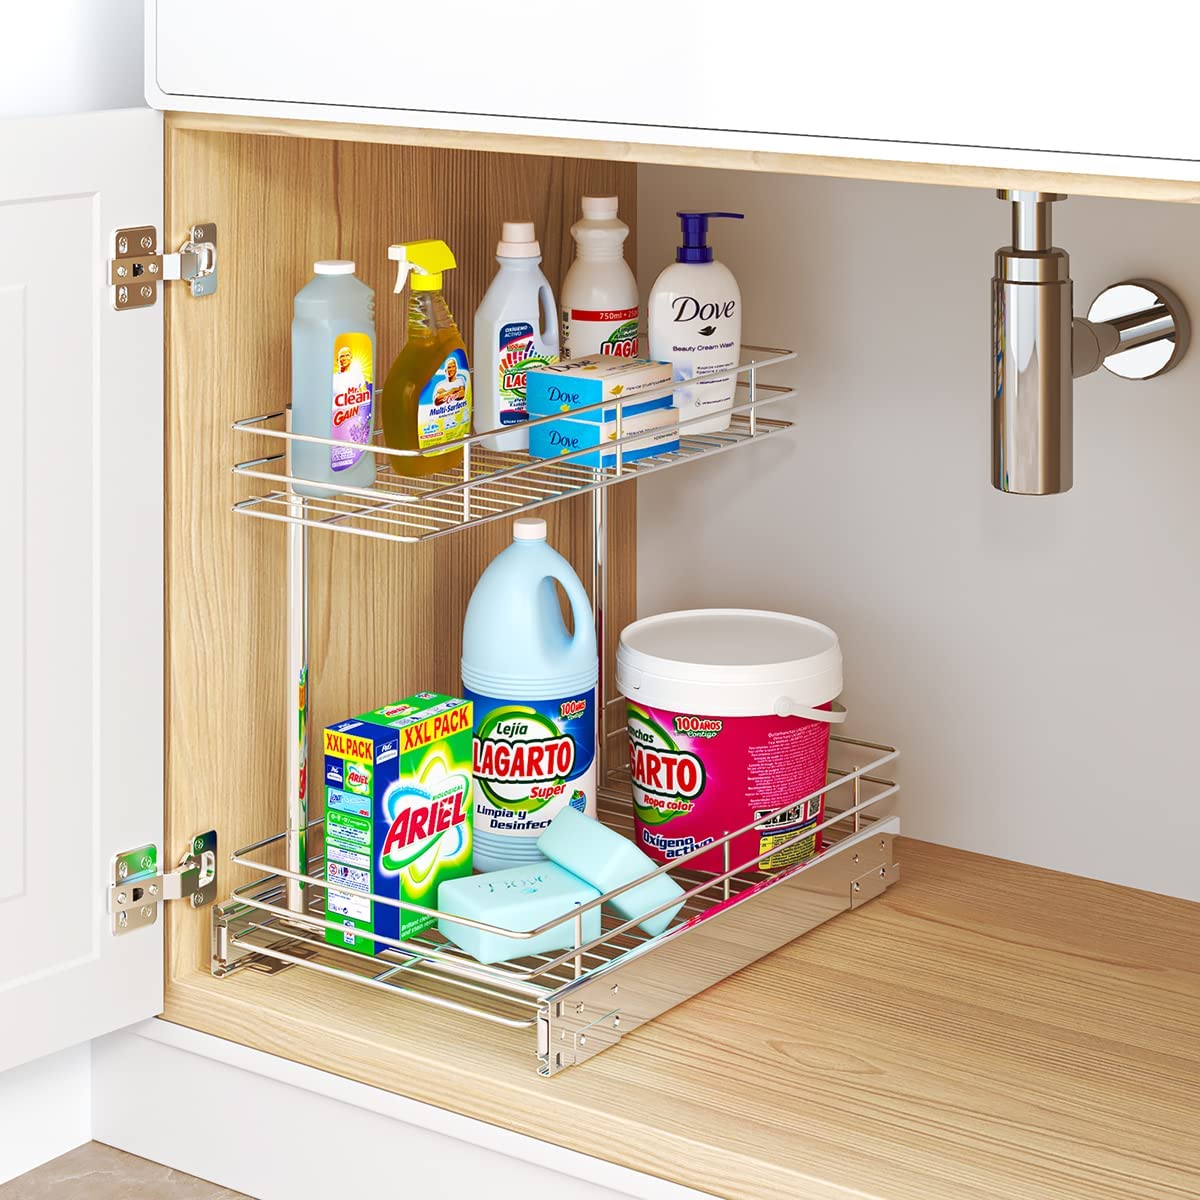 FANHAO Pull Out Cabinet Organizer,10.43W x 17.32D x 14.56H,Chrome